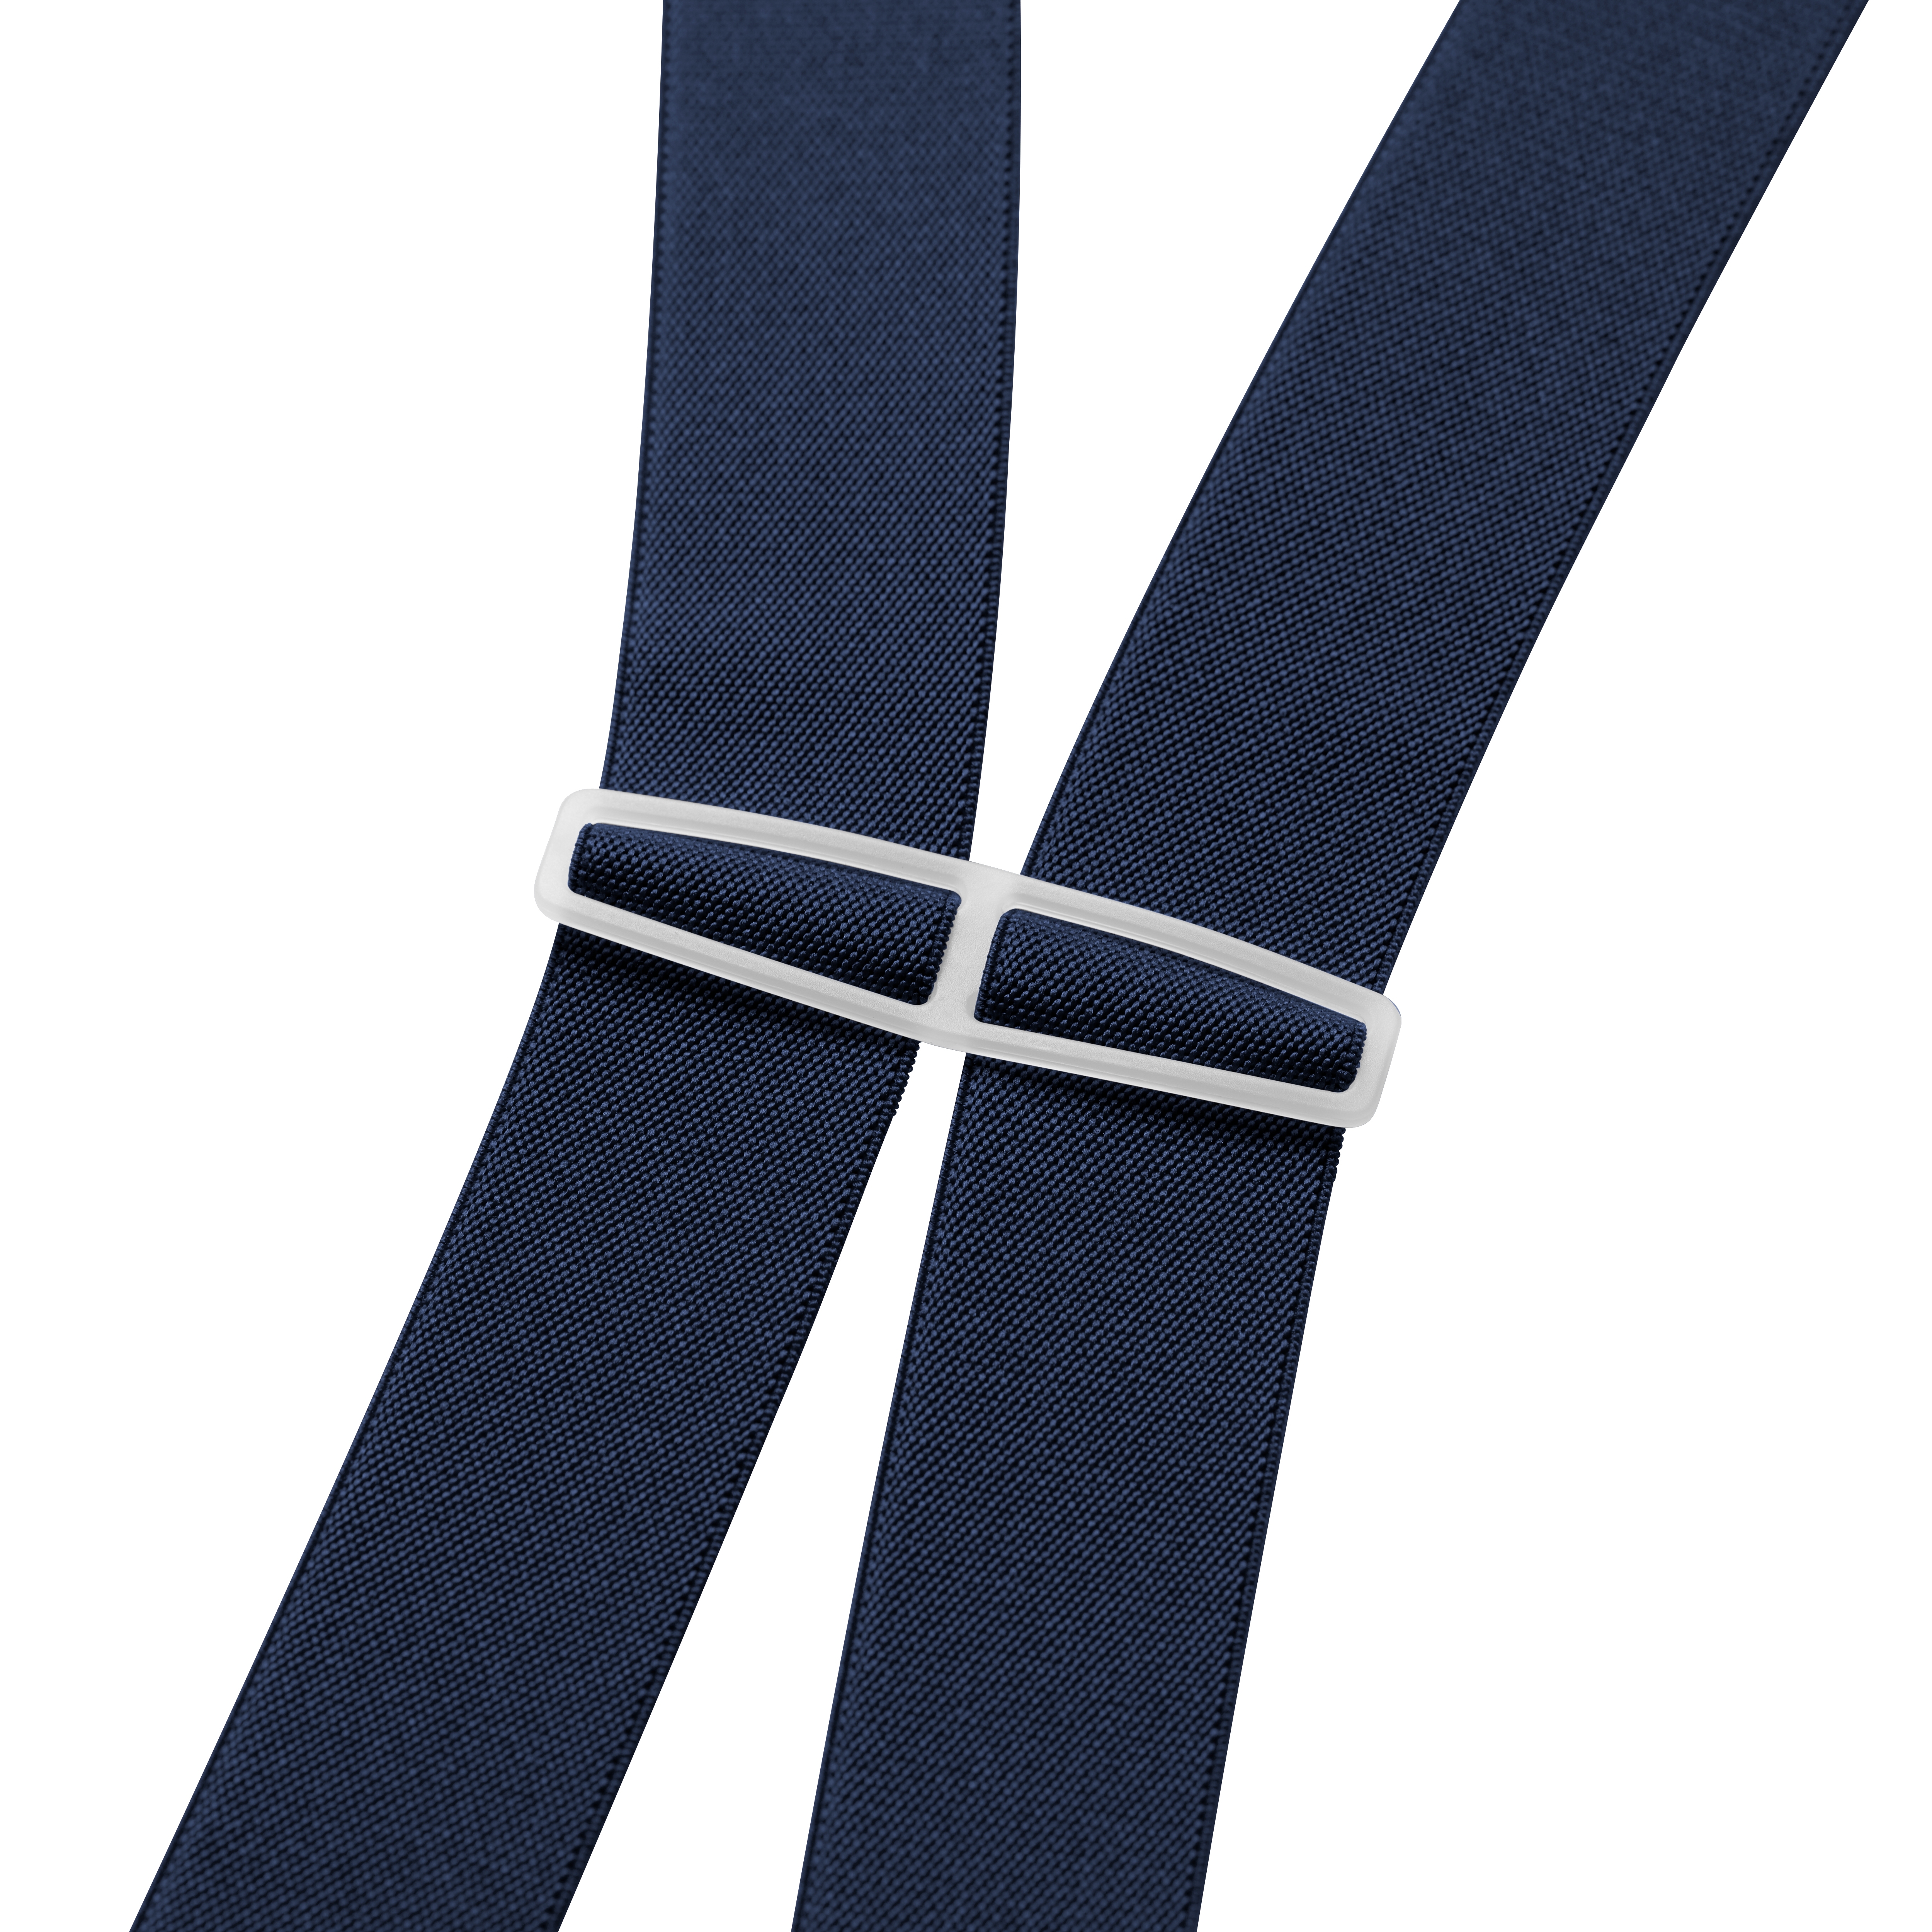 Thin clip-on braces - Textured royal blue